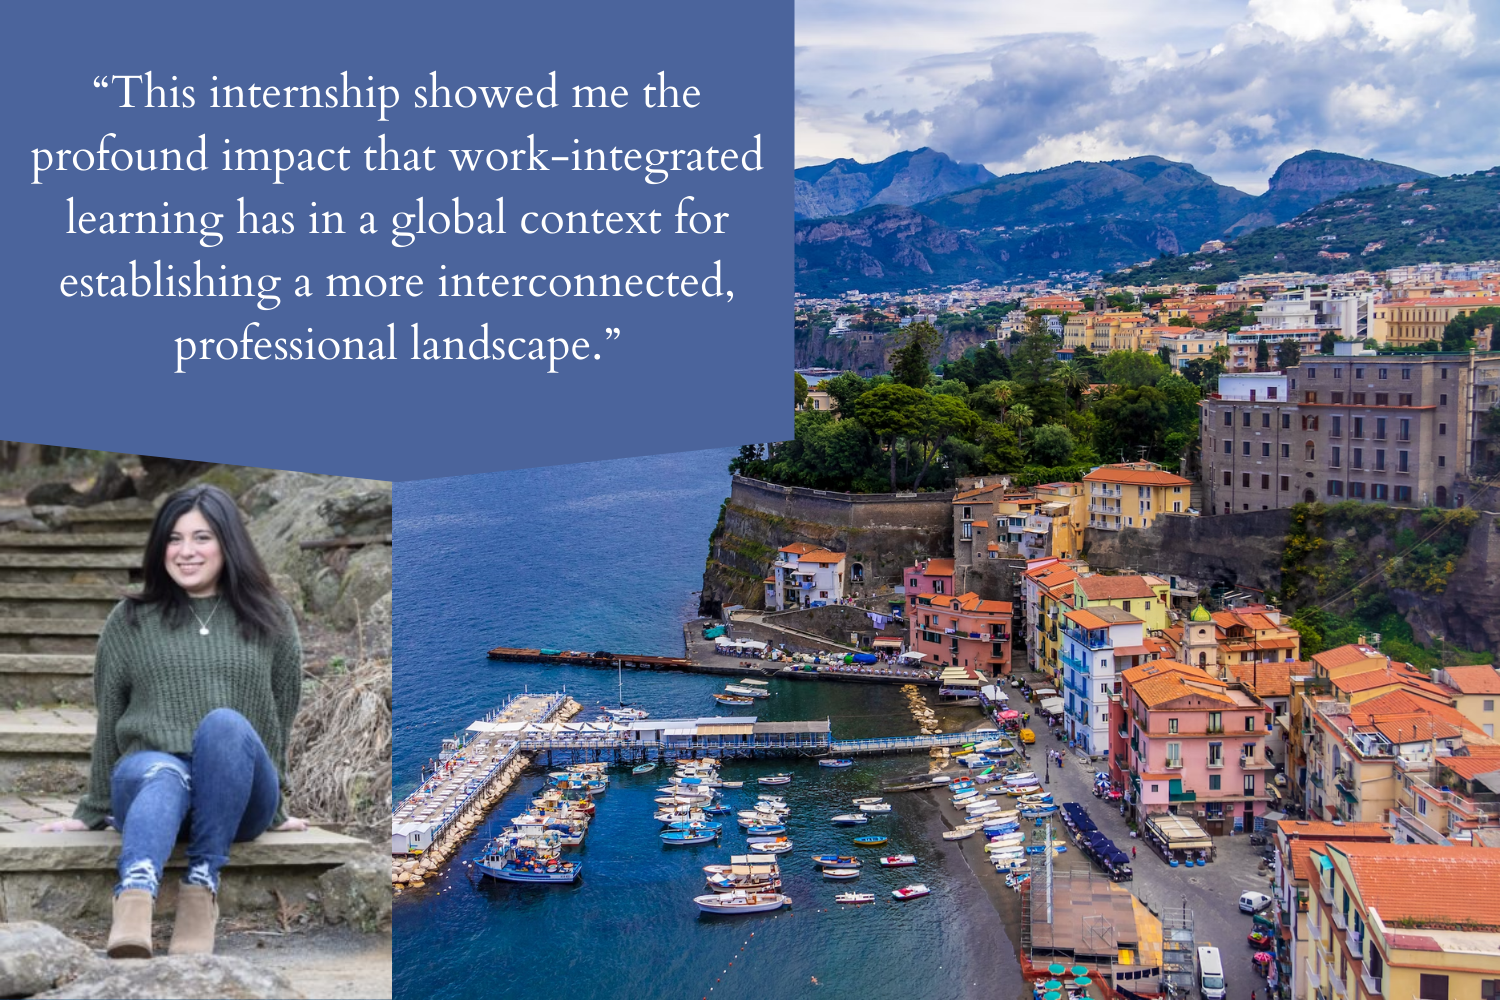 Backdrop of Sorrento, Italy with picture of and quote by Gianna Smurro.